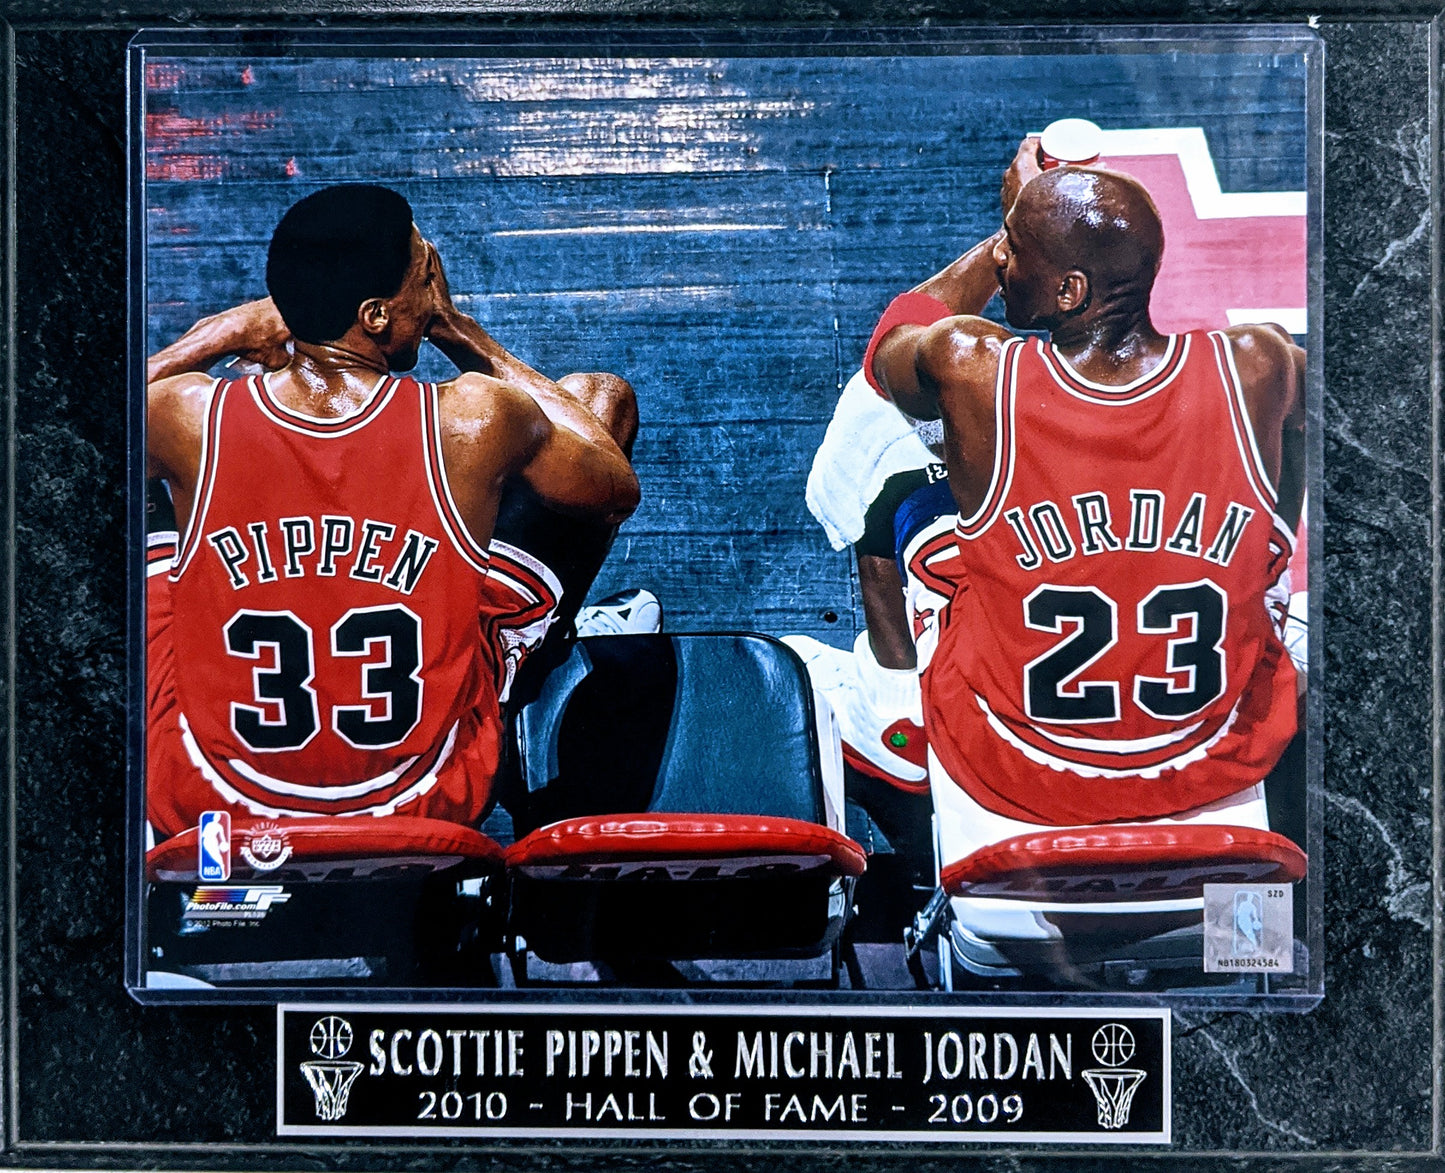 Michael Jordan & Scottie Pippen Chicago Bulls "2010-Hall of Fame-2009 Hall of Fame" Wall Plaque